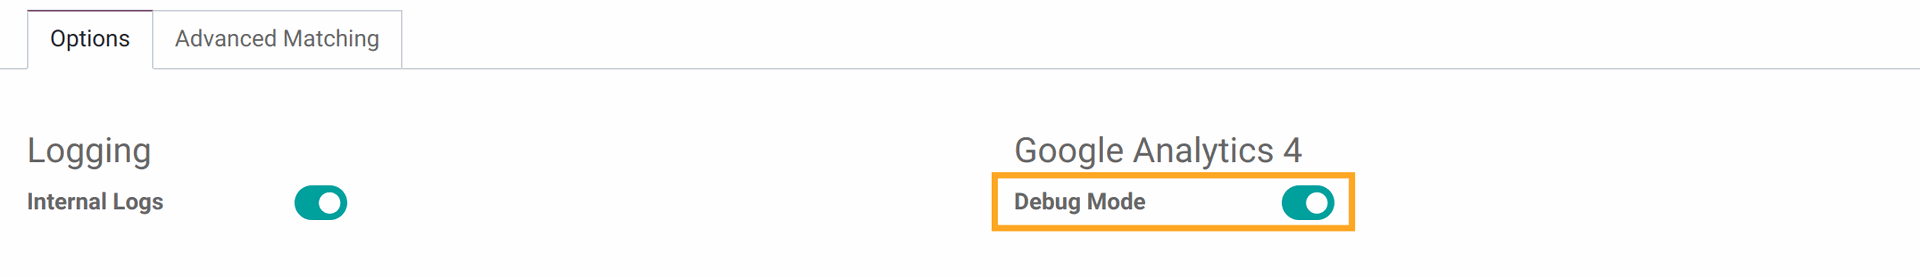 Odoo Google Analytics 4 events tracking - activate the Debug Mode 15.0